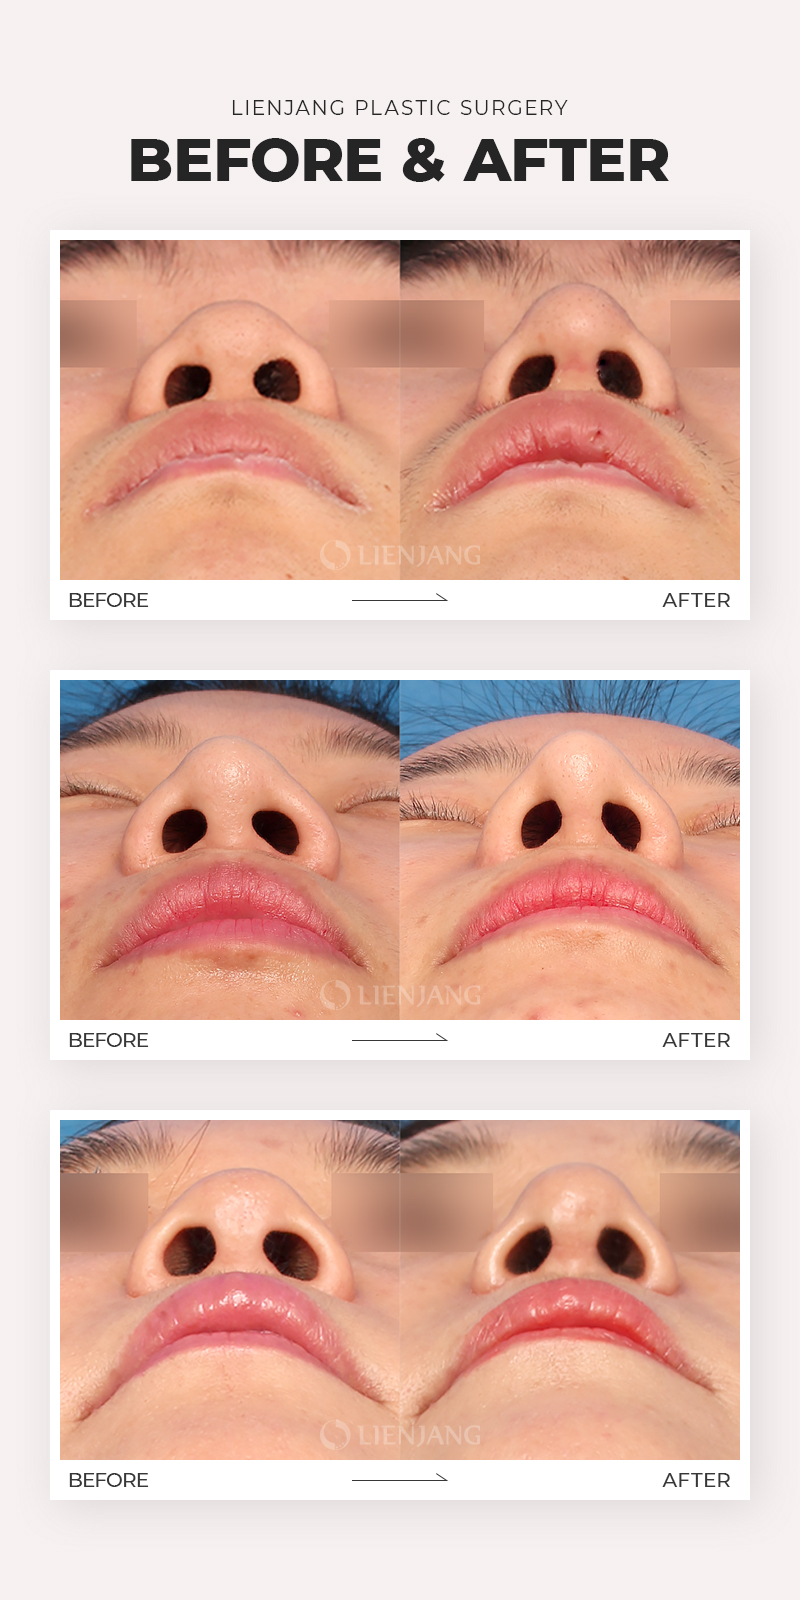 Before and after examples for Lienjang Alar reduction, nostril reduction, or Alarplasty in Korea